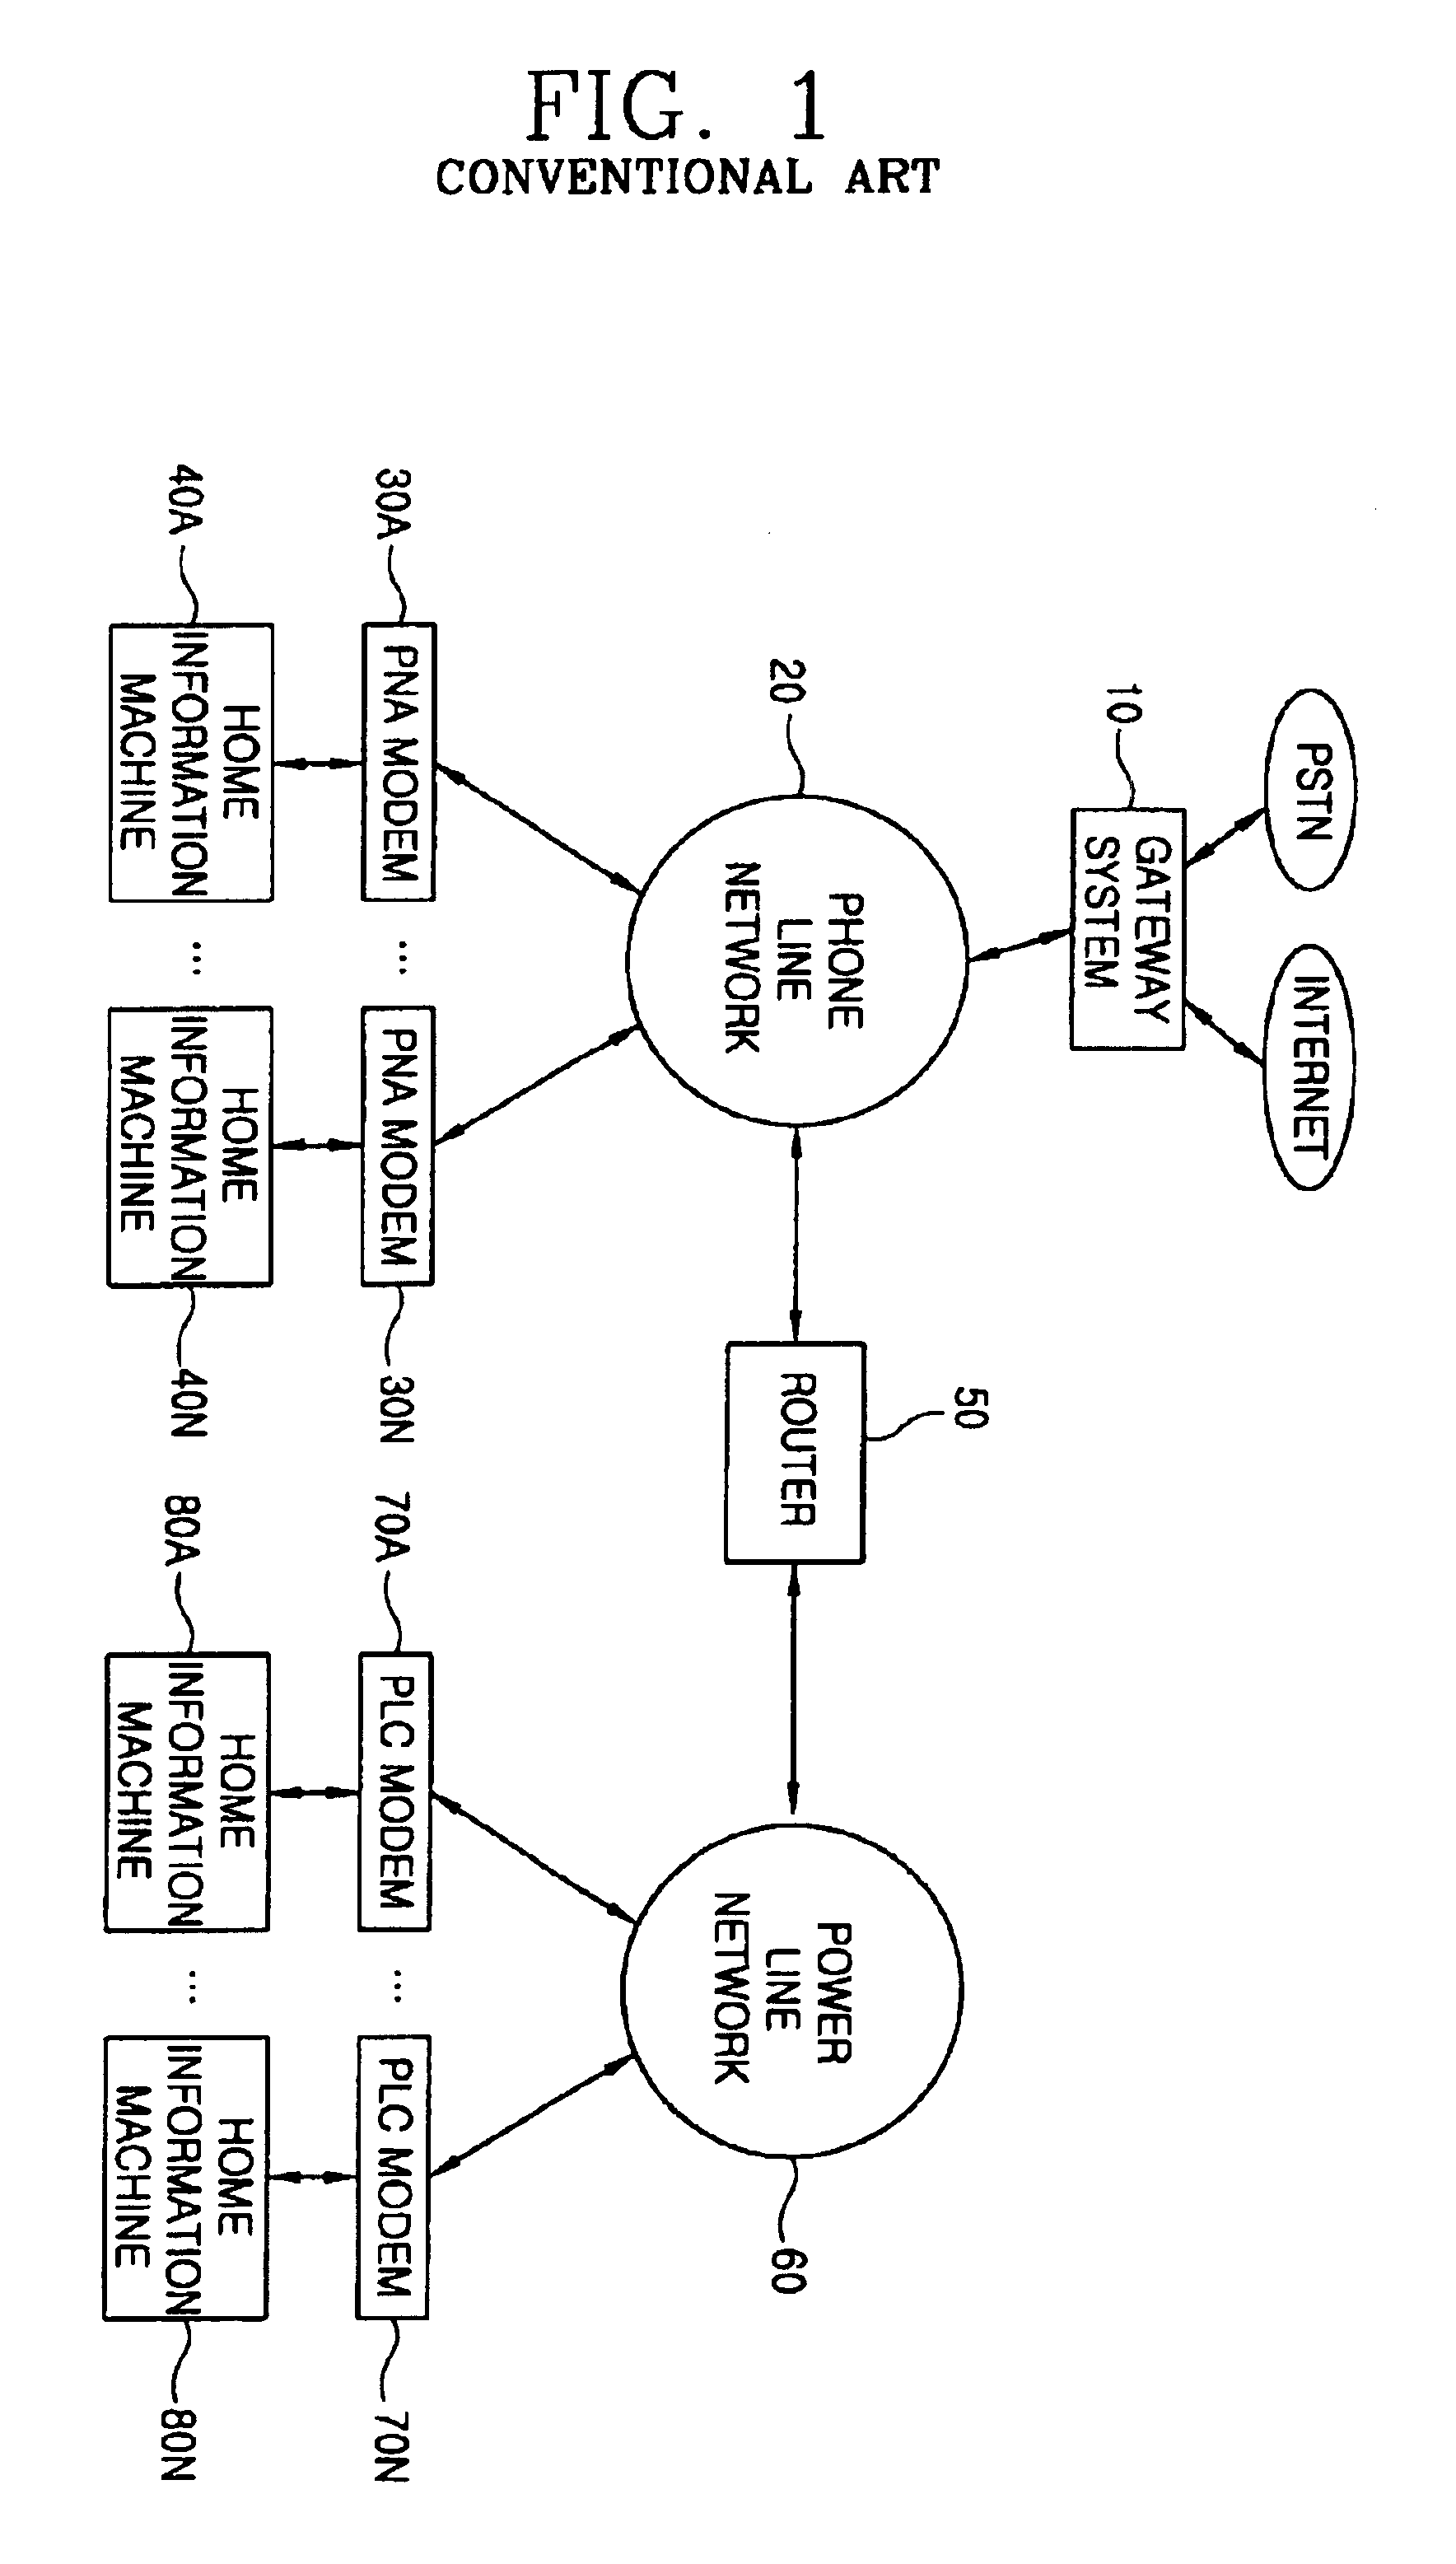 Network infrastructure integrated system